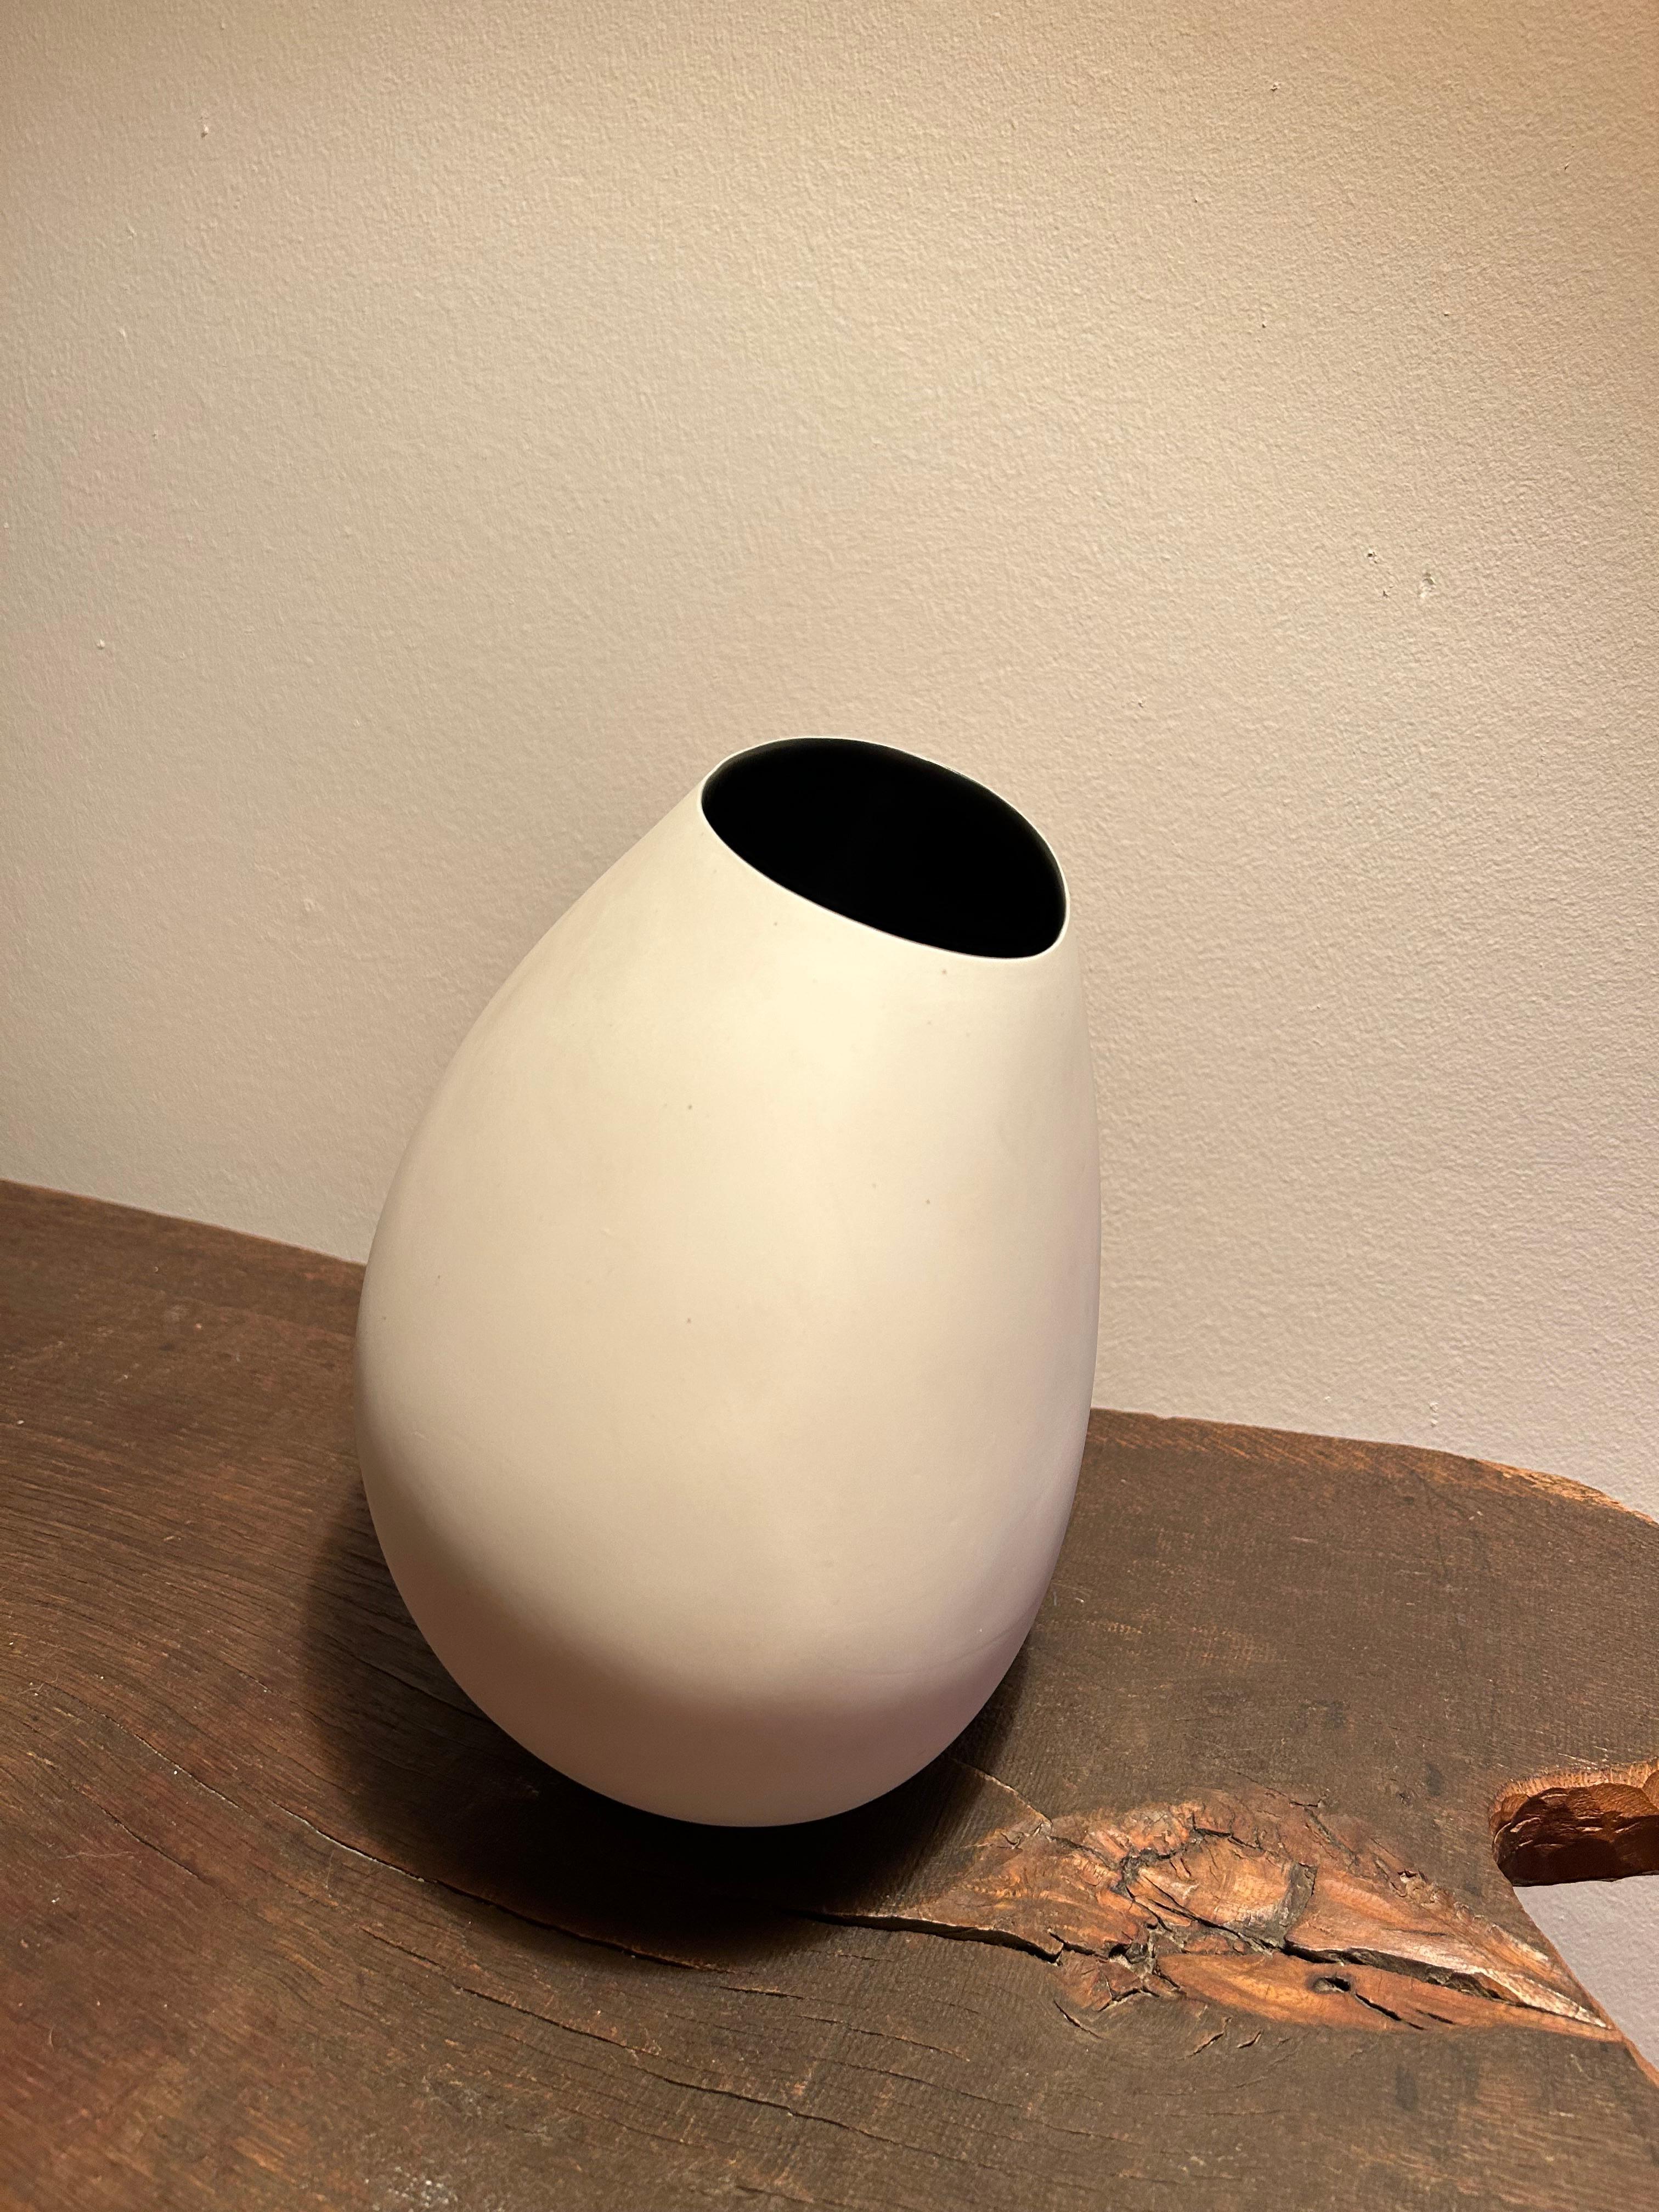 Rare and important organic vase by Danish ceramic artist Bente Hansen from 2001 from a batch of 100 pieces this model has number 49 out of 100.

This vase is the perfect center piece for any style of interior and fits all style from the typical